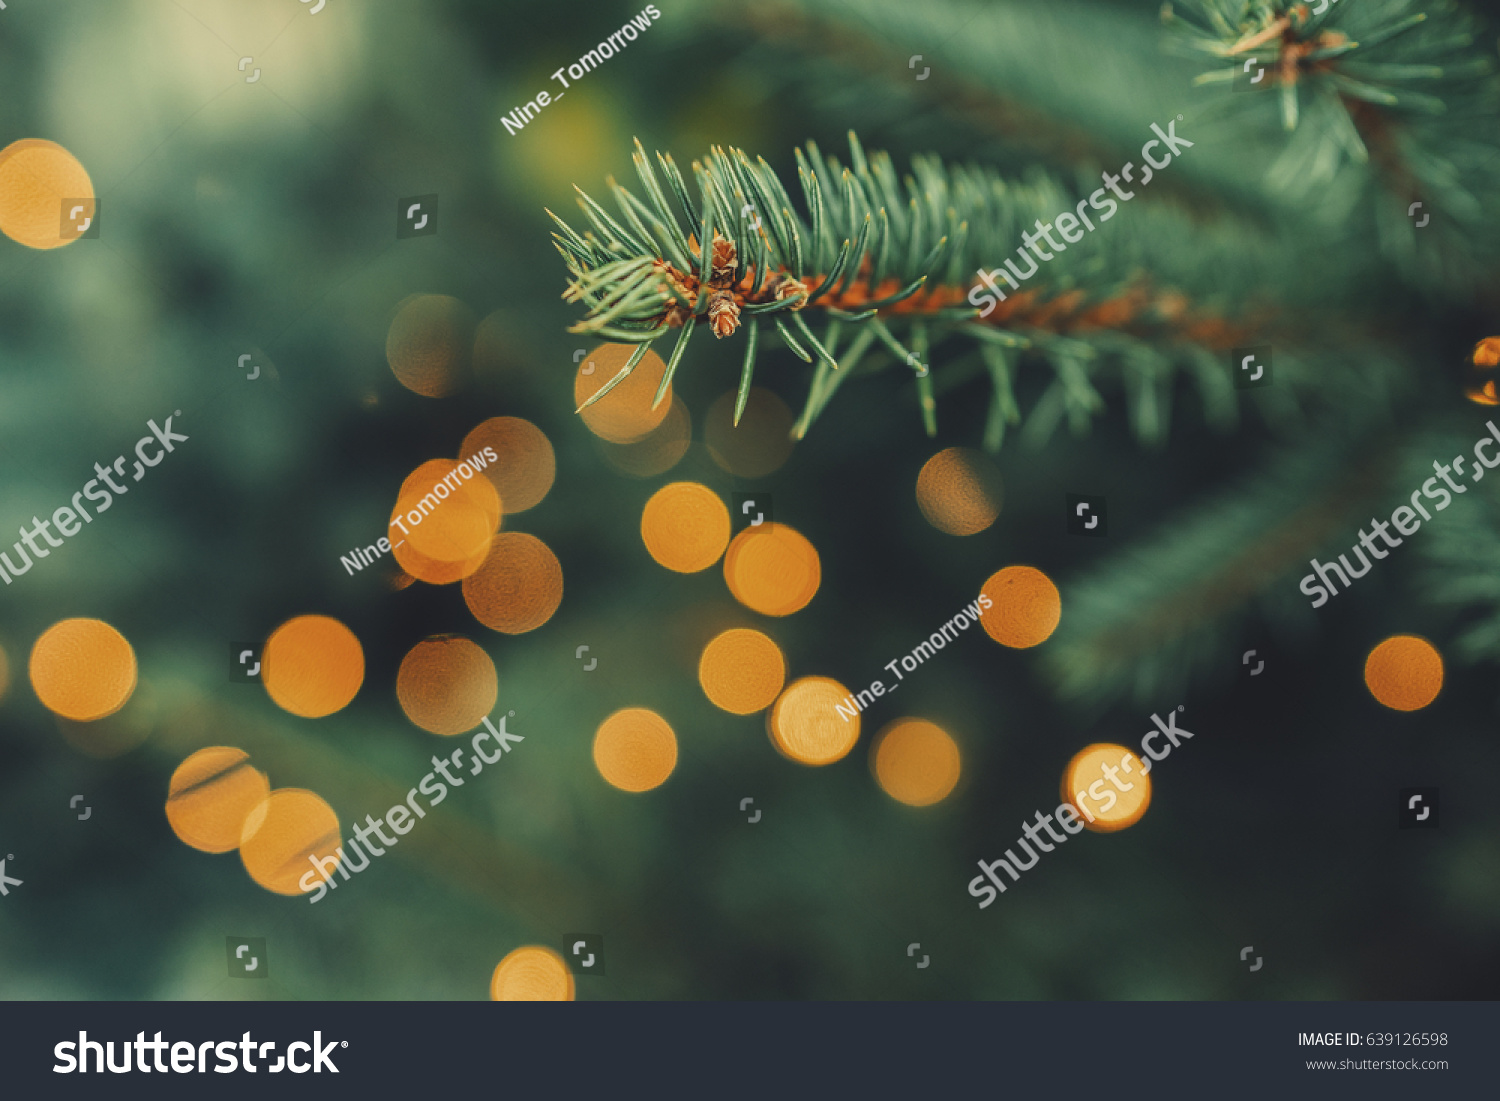 Fir-tree spruce branch with orange bokeh unfocused sparkles decor lights. Christmas new year year background template. Holiday wallpaper concept. Shallow focus. Vintage effect. Copy space. #639126598